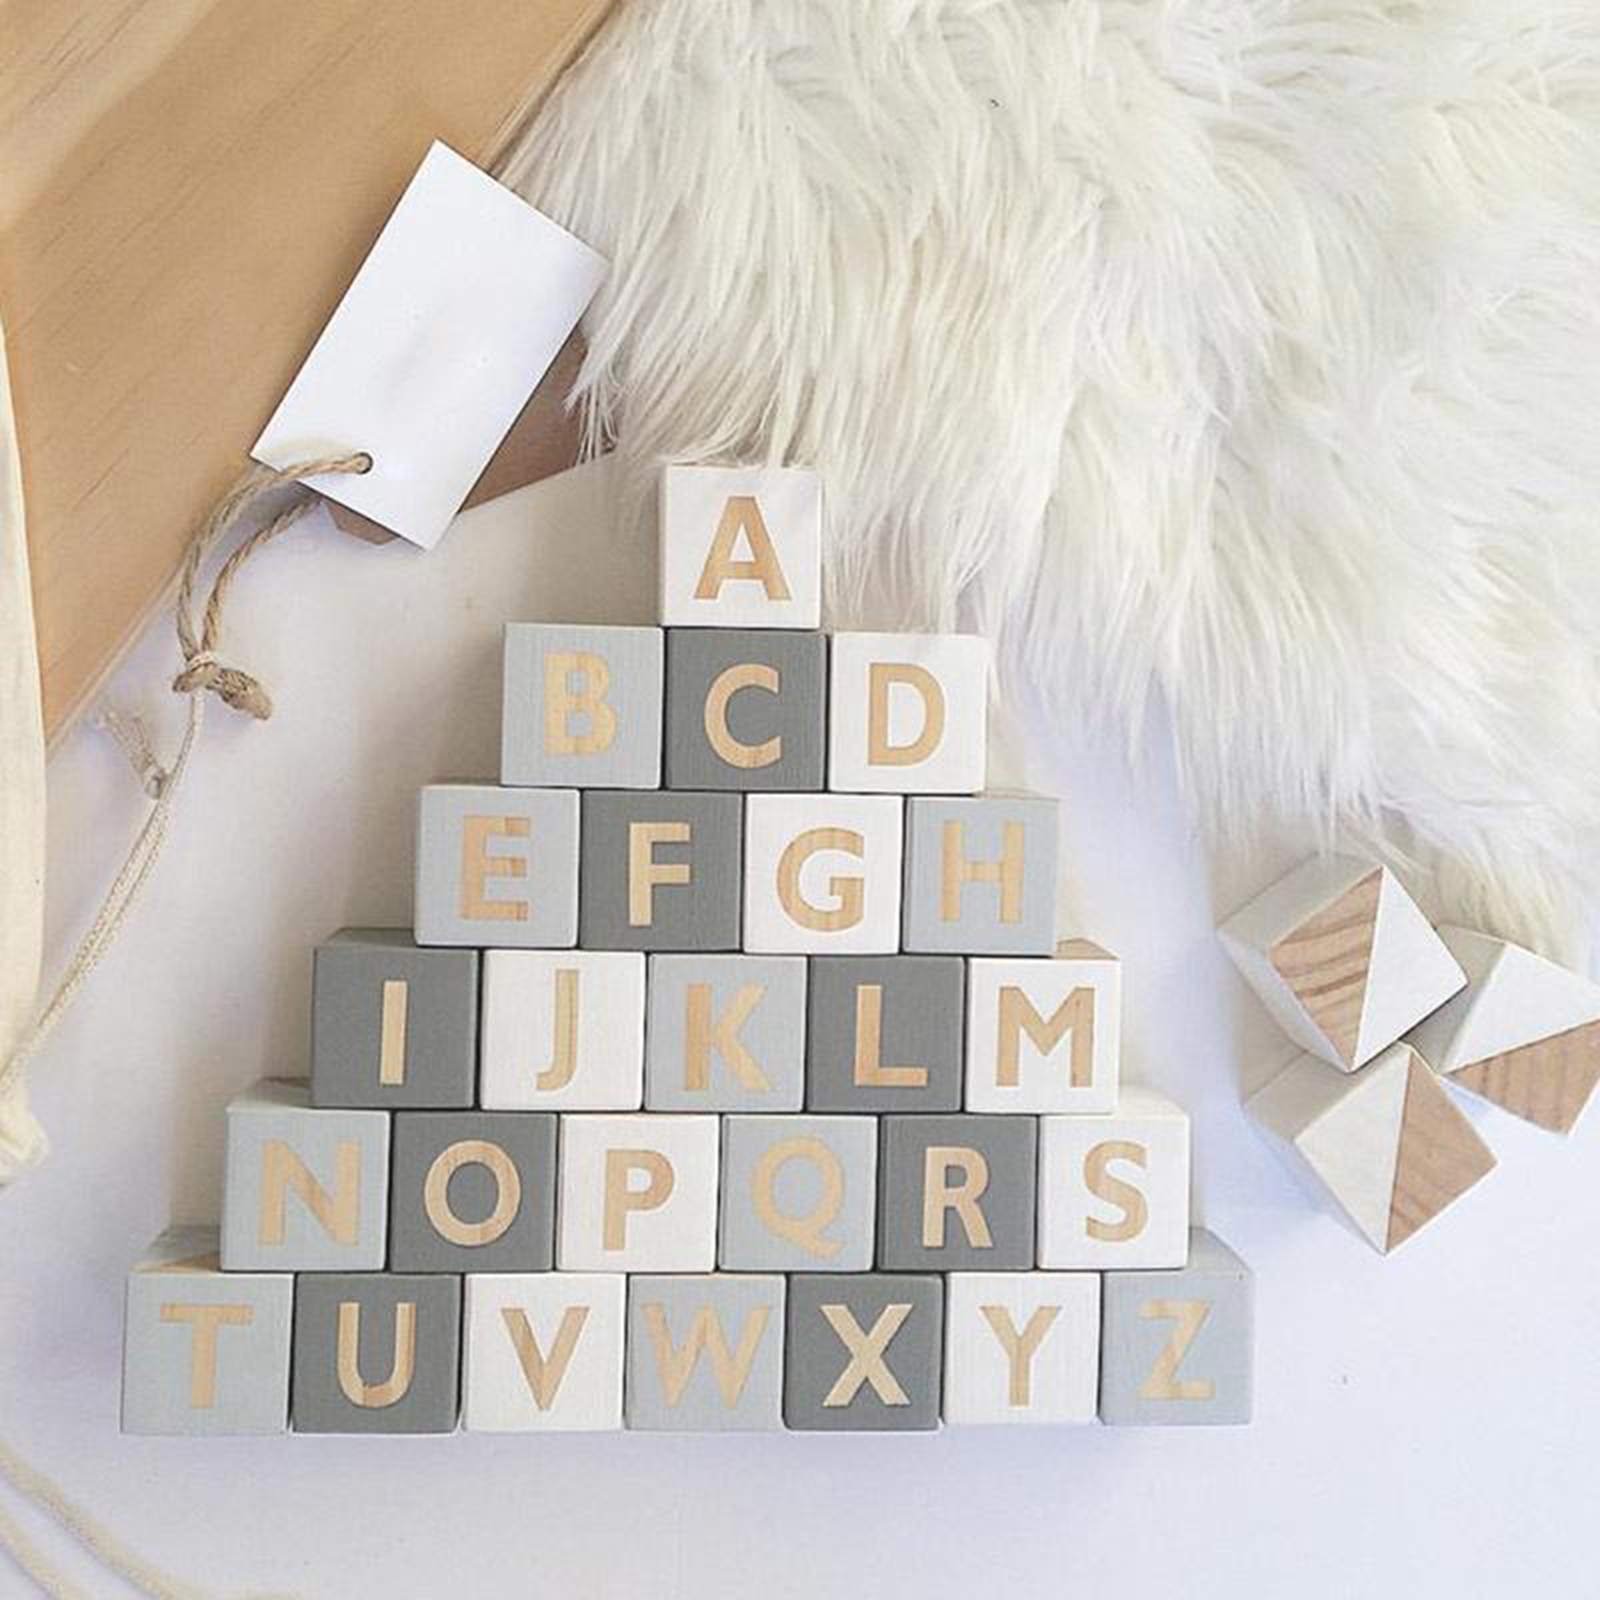 10pcs Mini Wooden Cubes Square Blocks Baby Puzzle Making Wooden Craving Painting for Crafts DIY Projects Kids Hobbies Toys